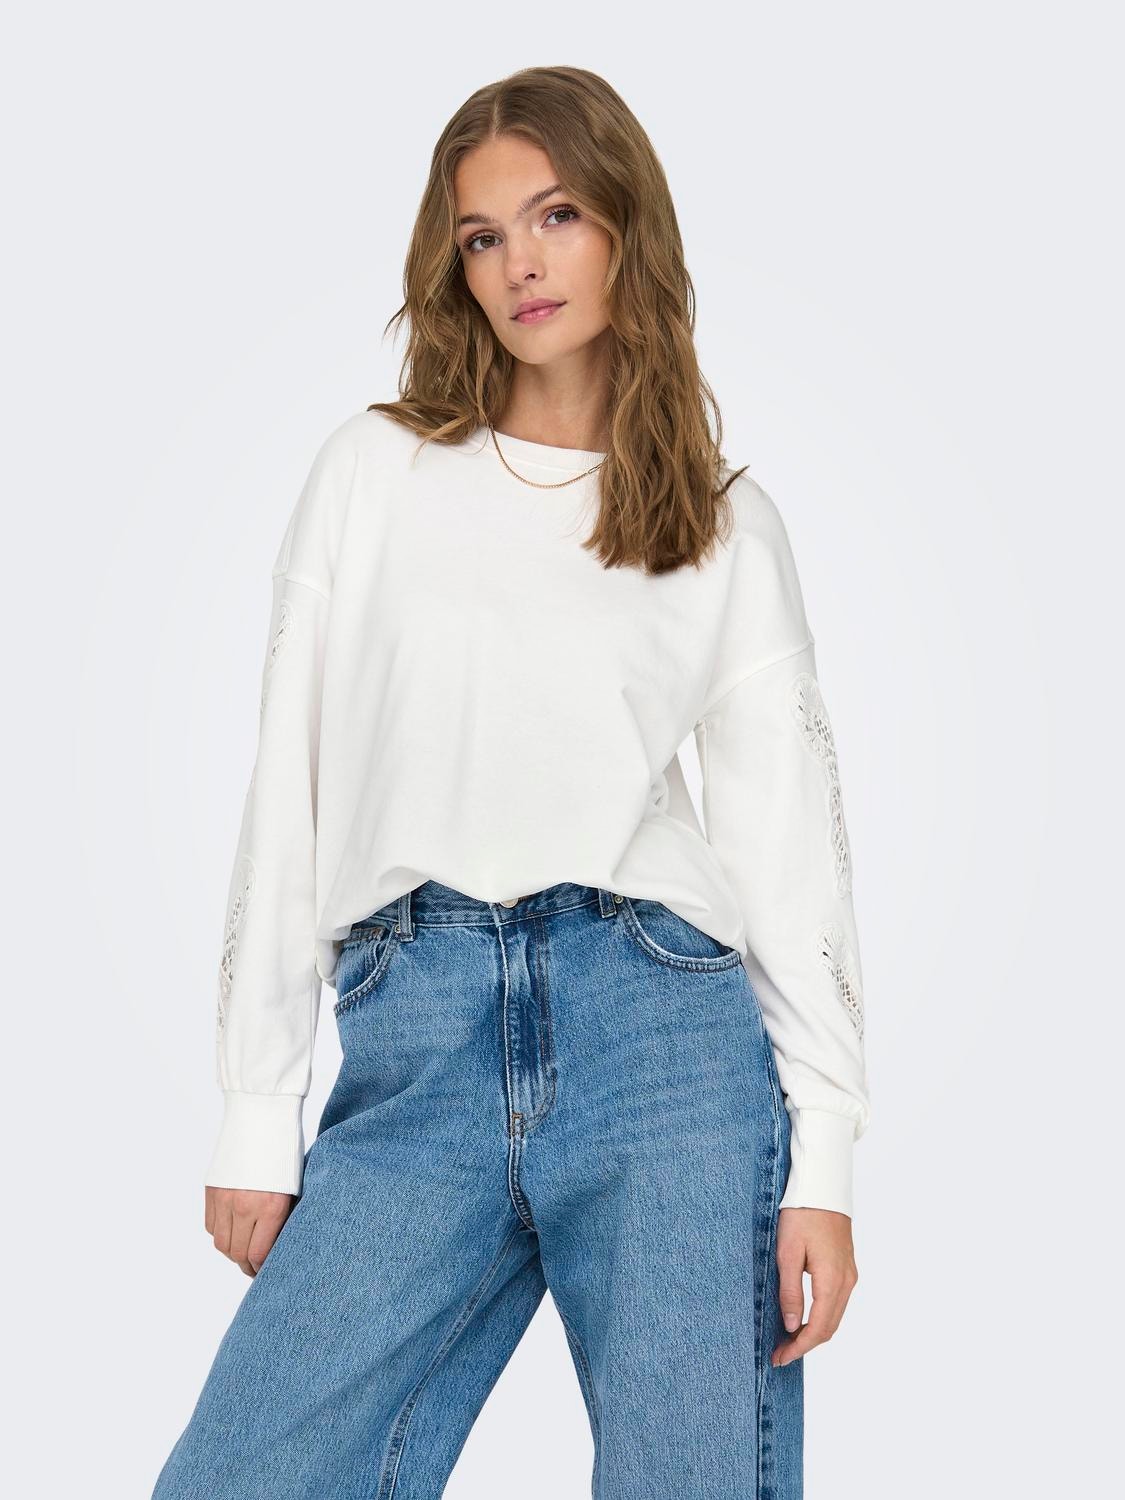 ONLY sweatshirt with embroidery -Cloud Dancer - 15315668